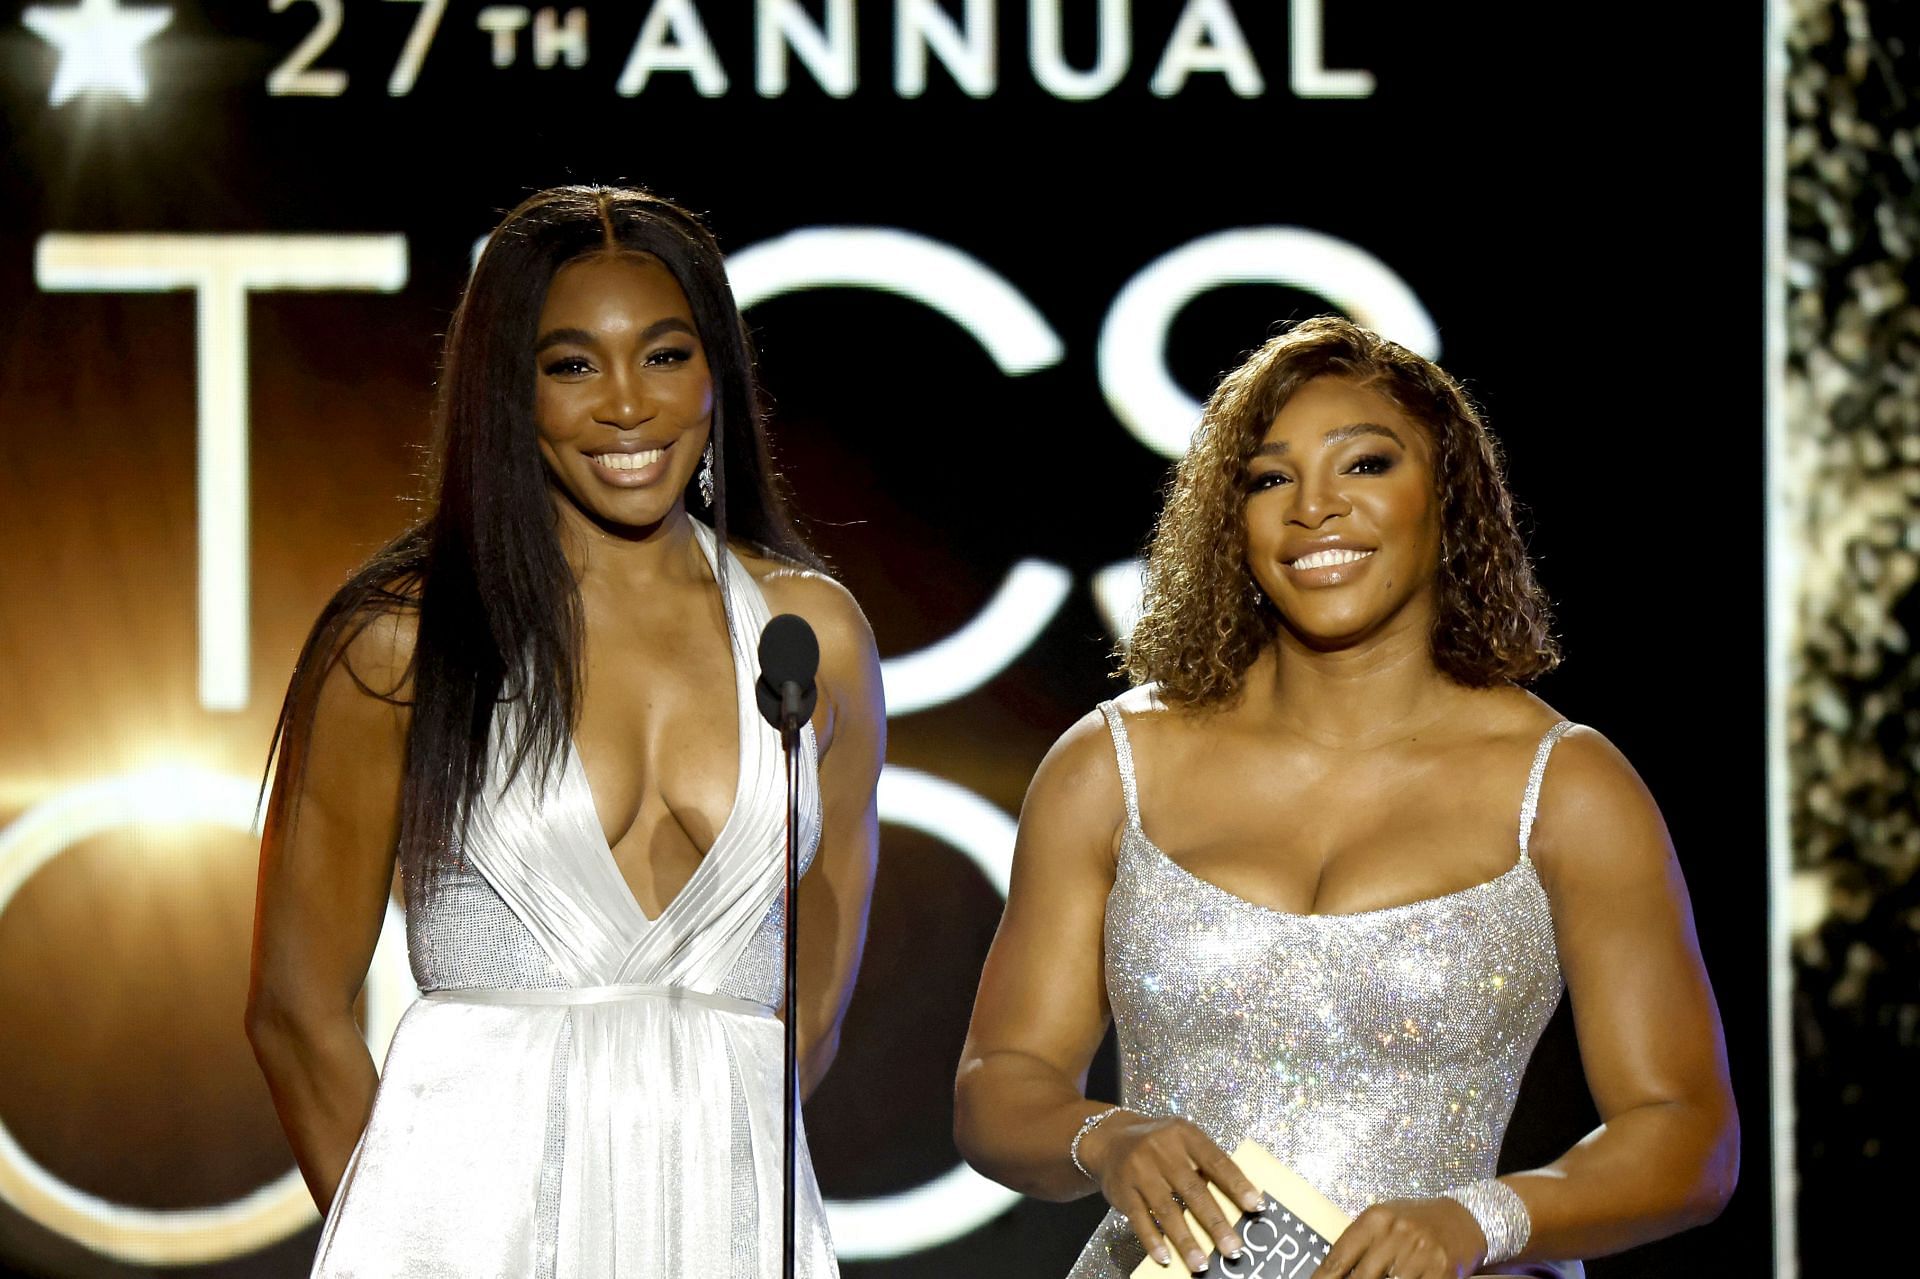 Venus Williams and younger sister Serena attend the 27th Annual Critics Choice Awards where lead actor Will Smith won Best Actor for his role in King Richard